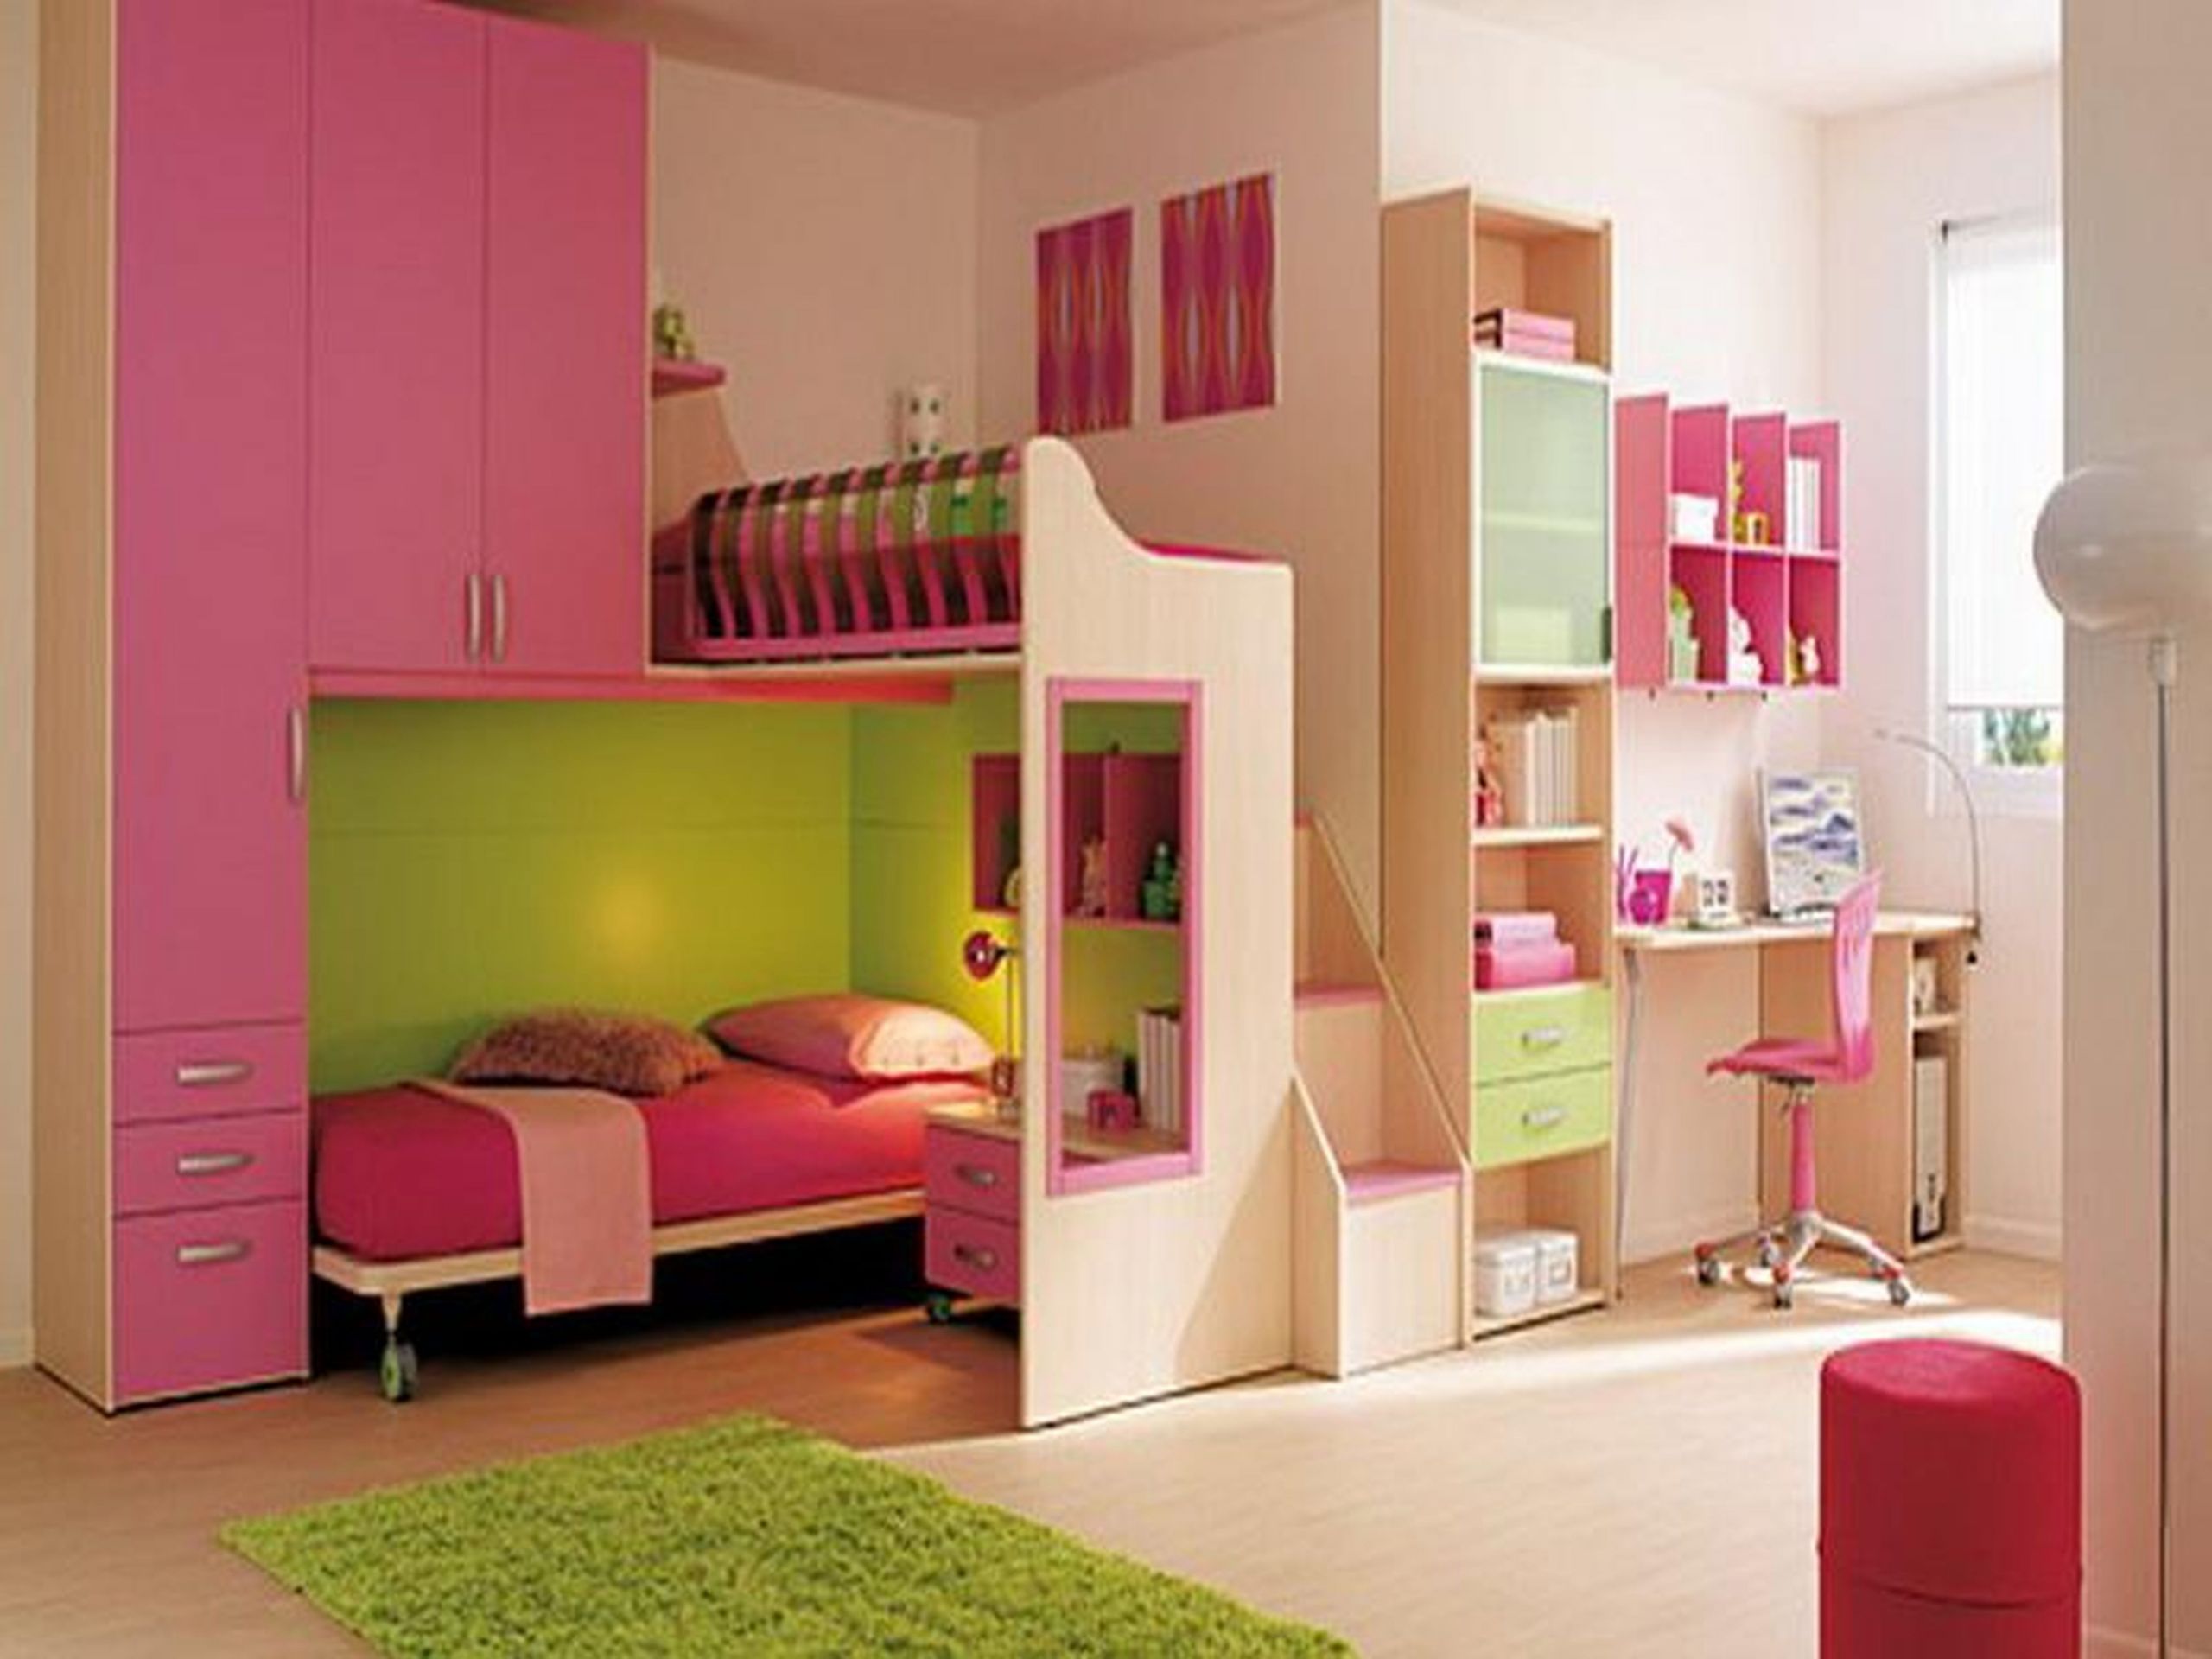 Diy Bedroom Organizers
 DIY Storage Ideas For Kids Room Crafts To Do With Kids